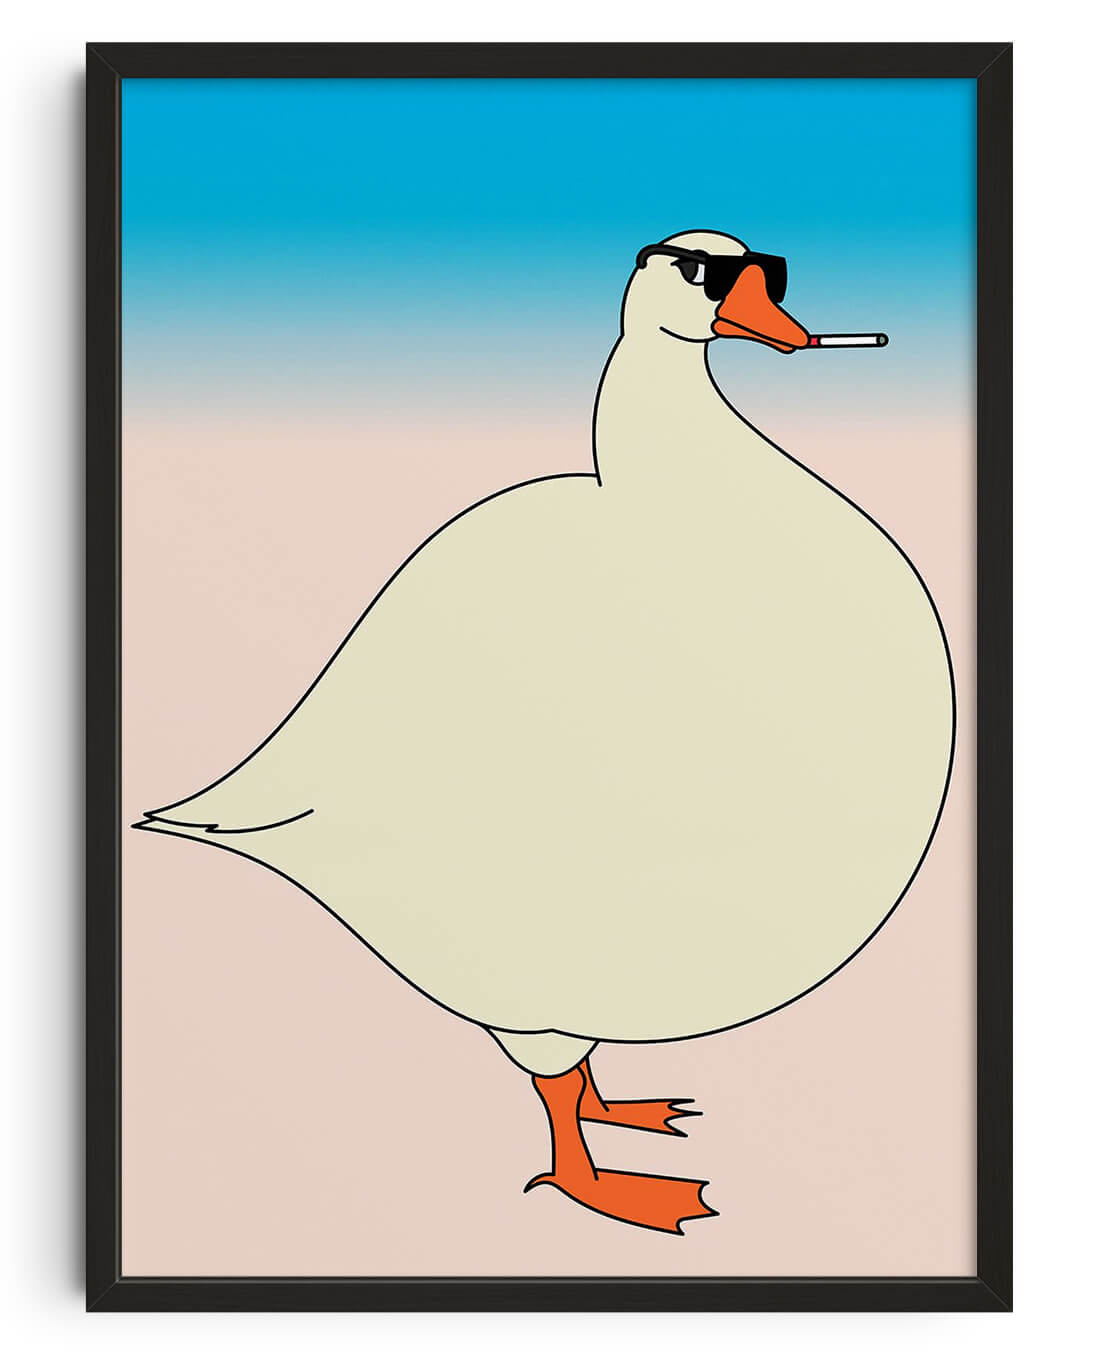 Goose by Will Da Costa contemporary wall art print from DROOL